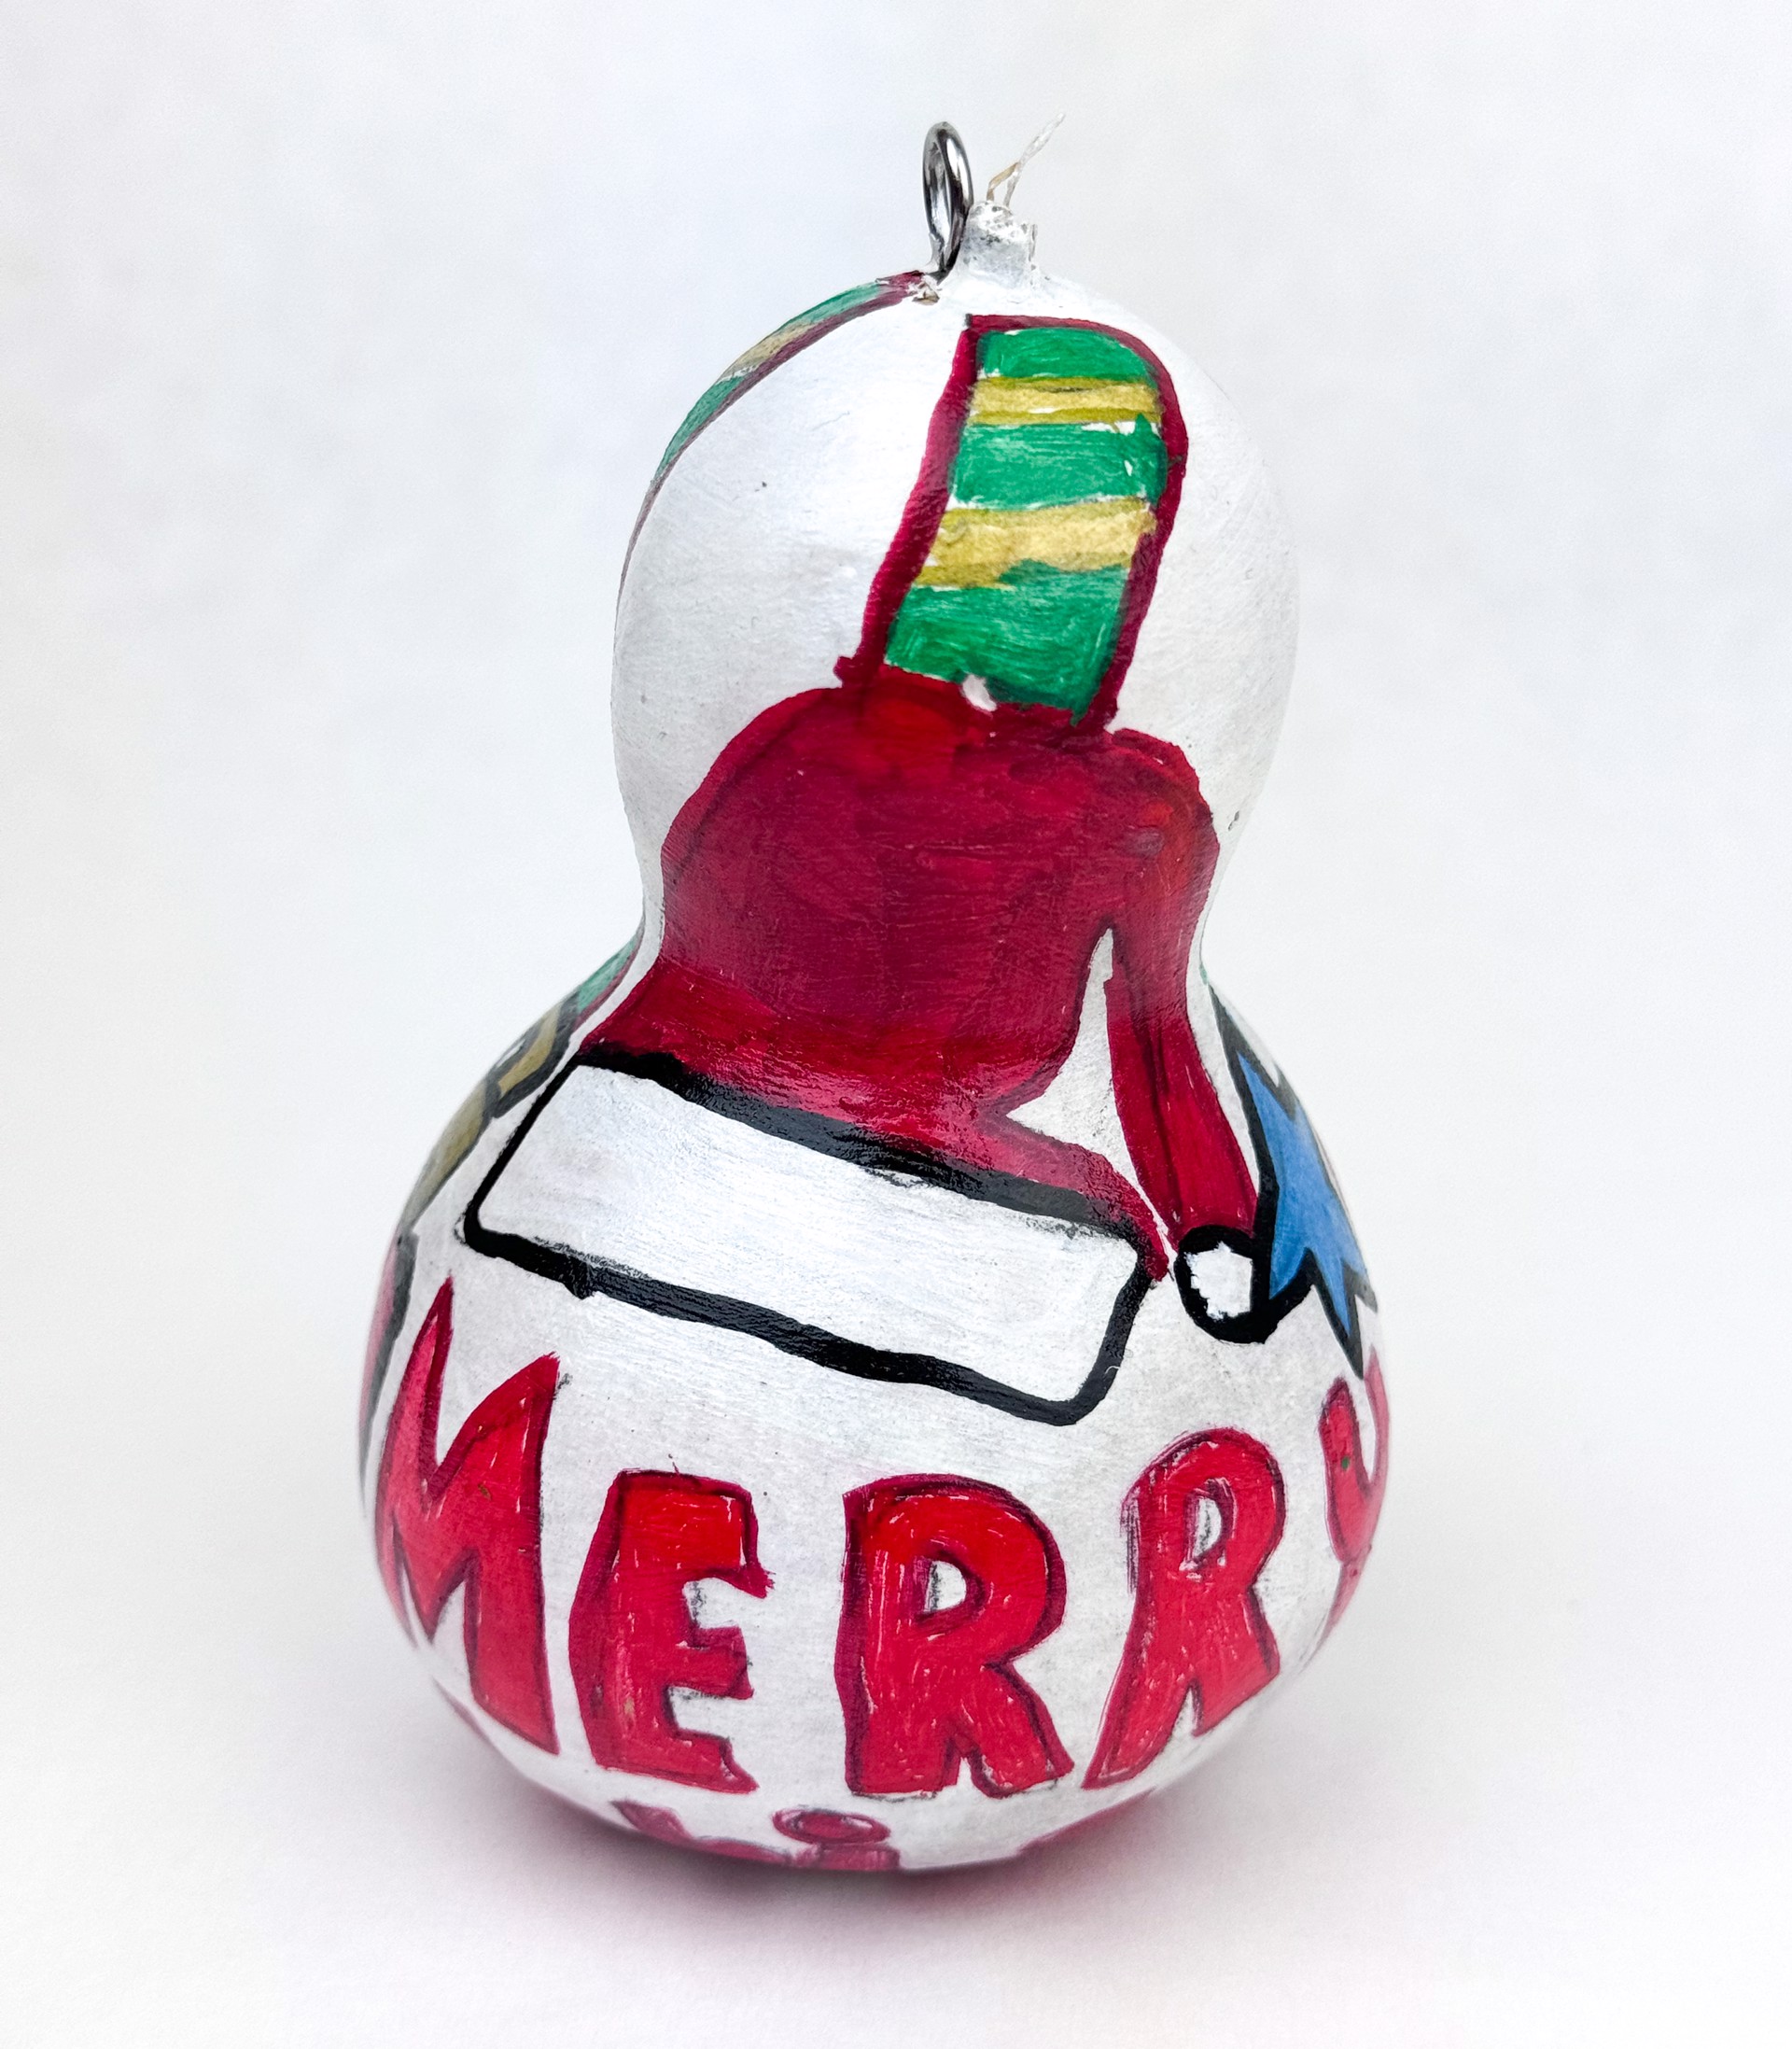 Holiday Ornaments (ornament) by Vanessa Monroe